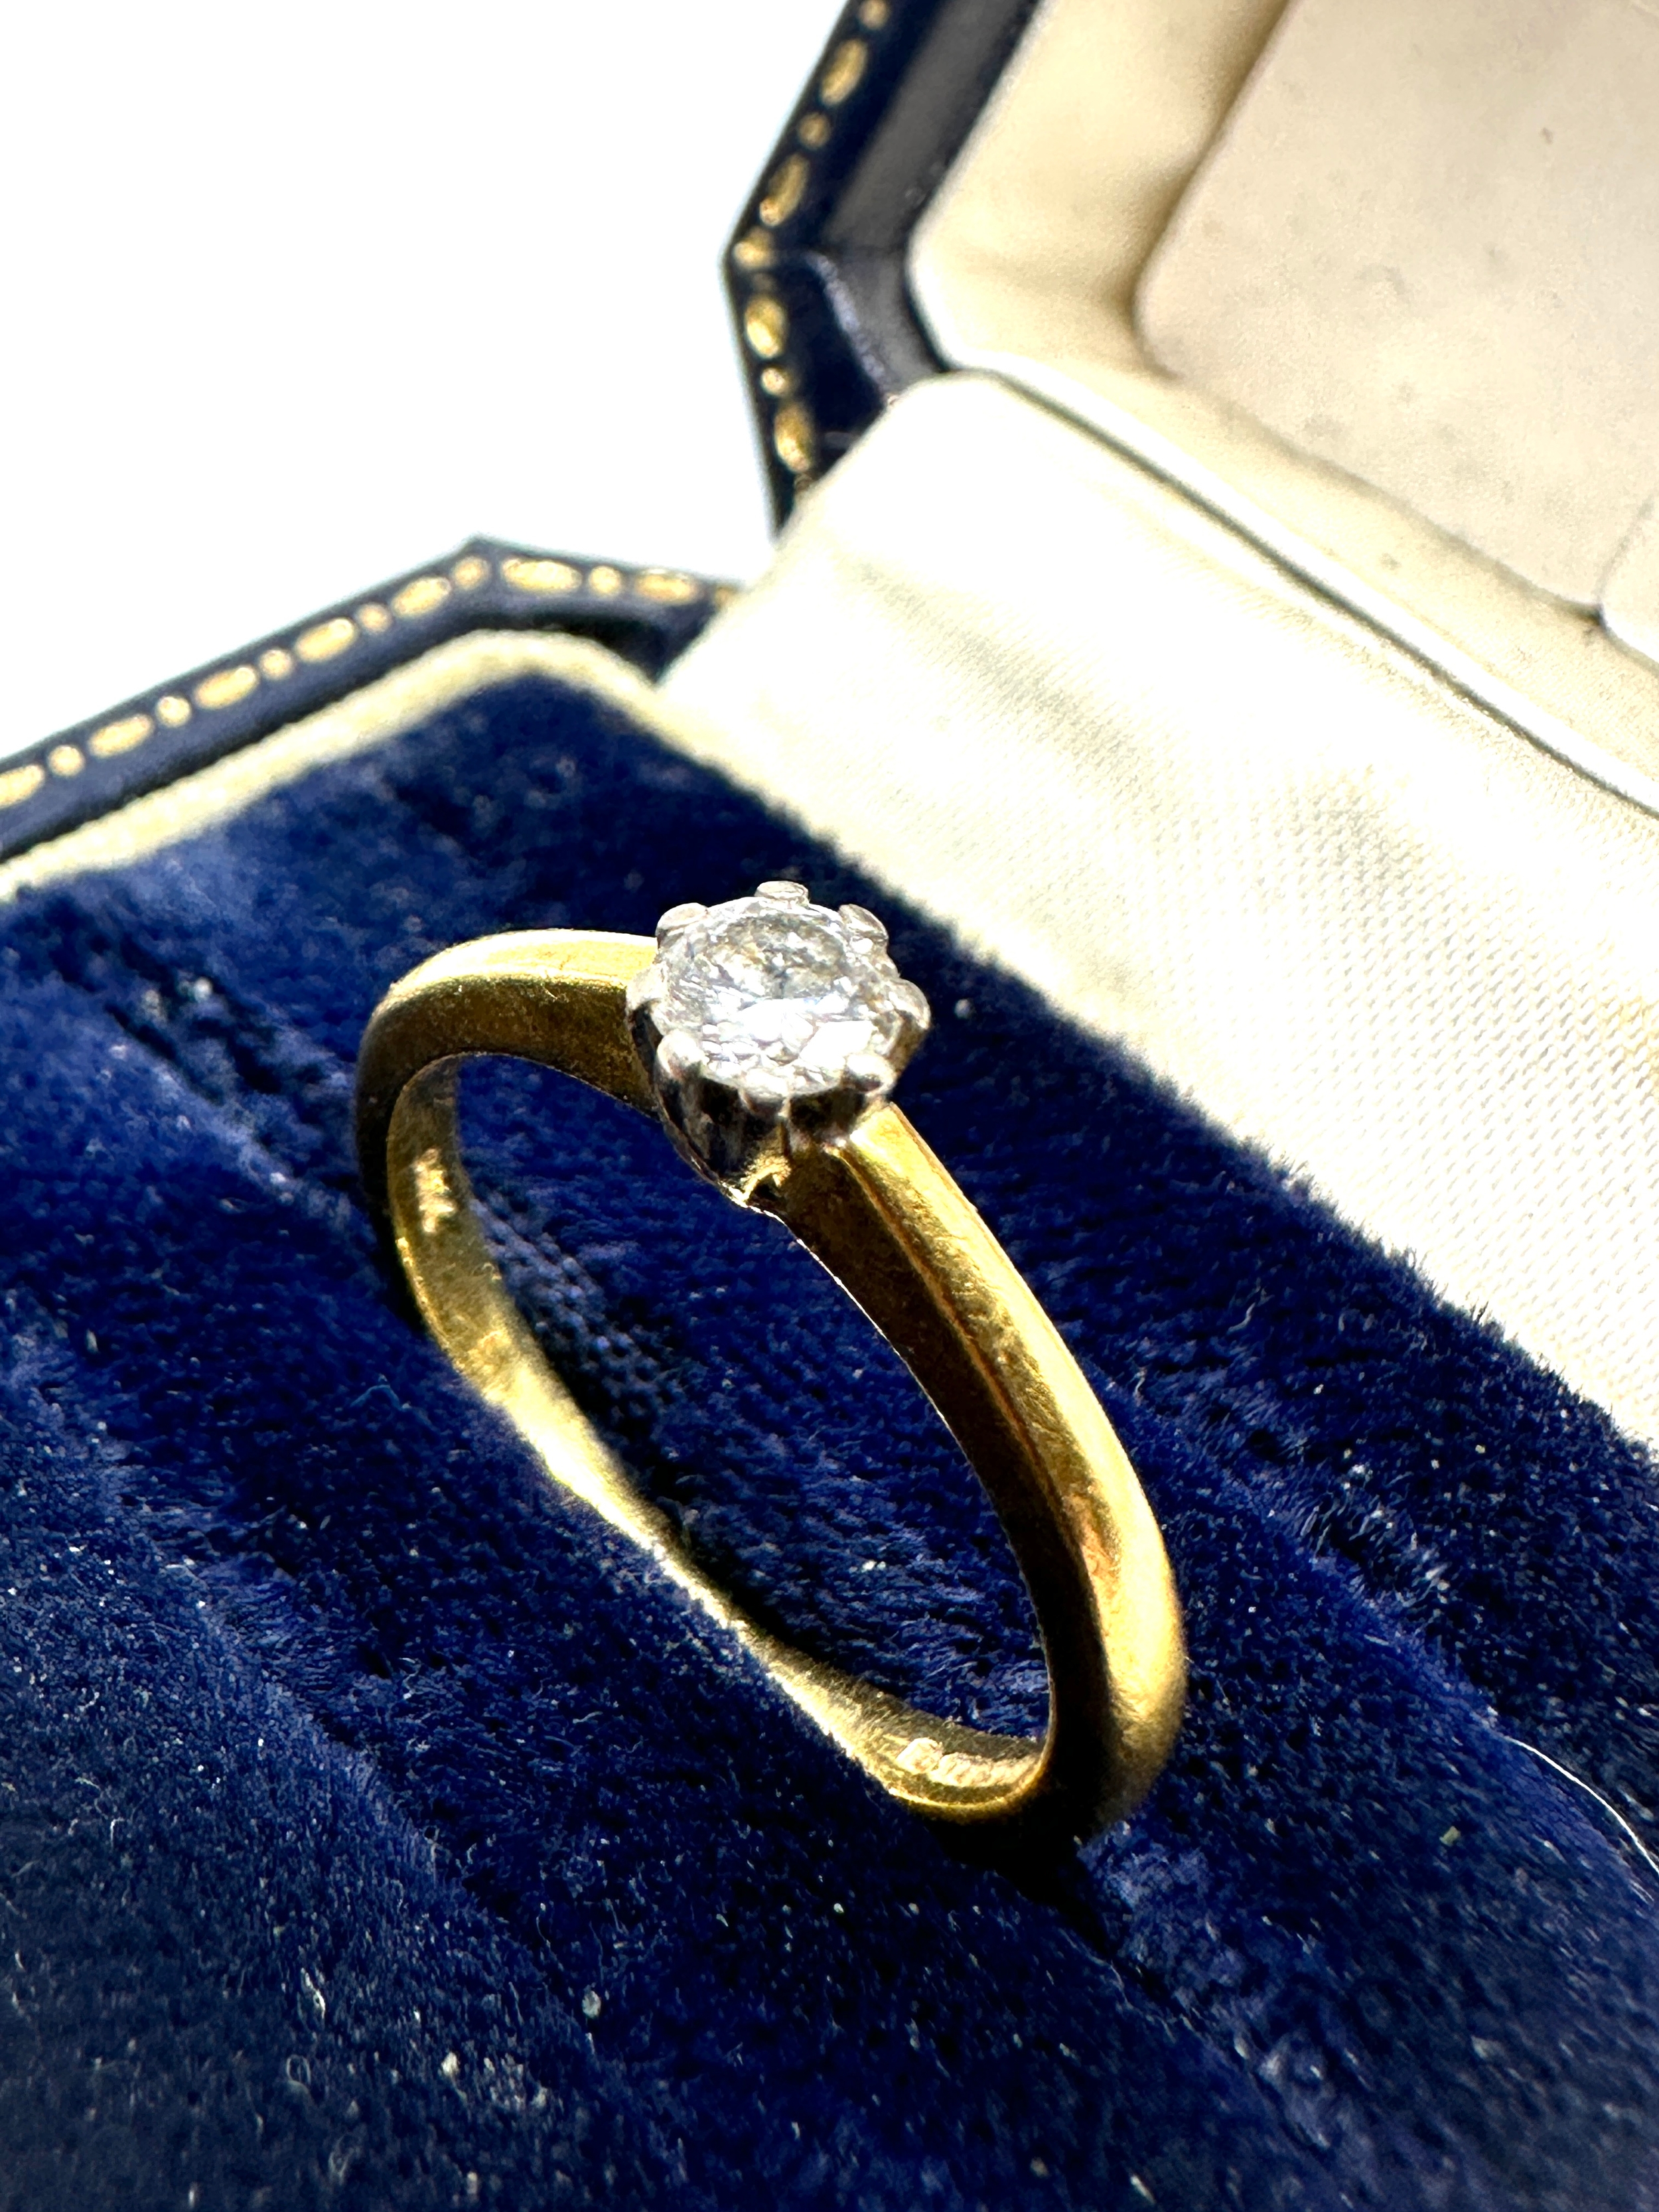 18ct gold solitaire diamond ring diamond measures approx 4mm weight 2.8g - Image 3 of 4